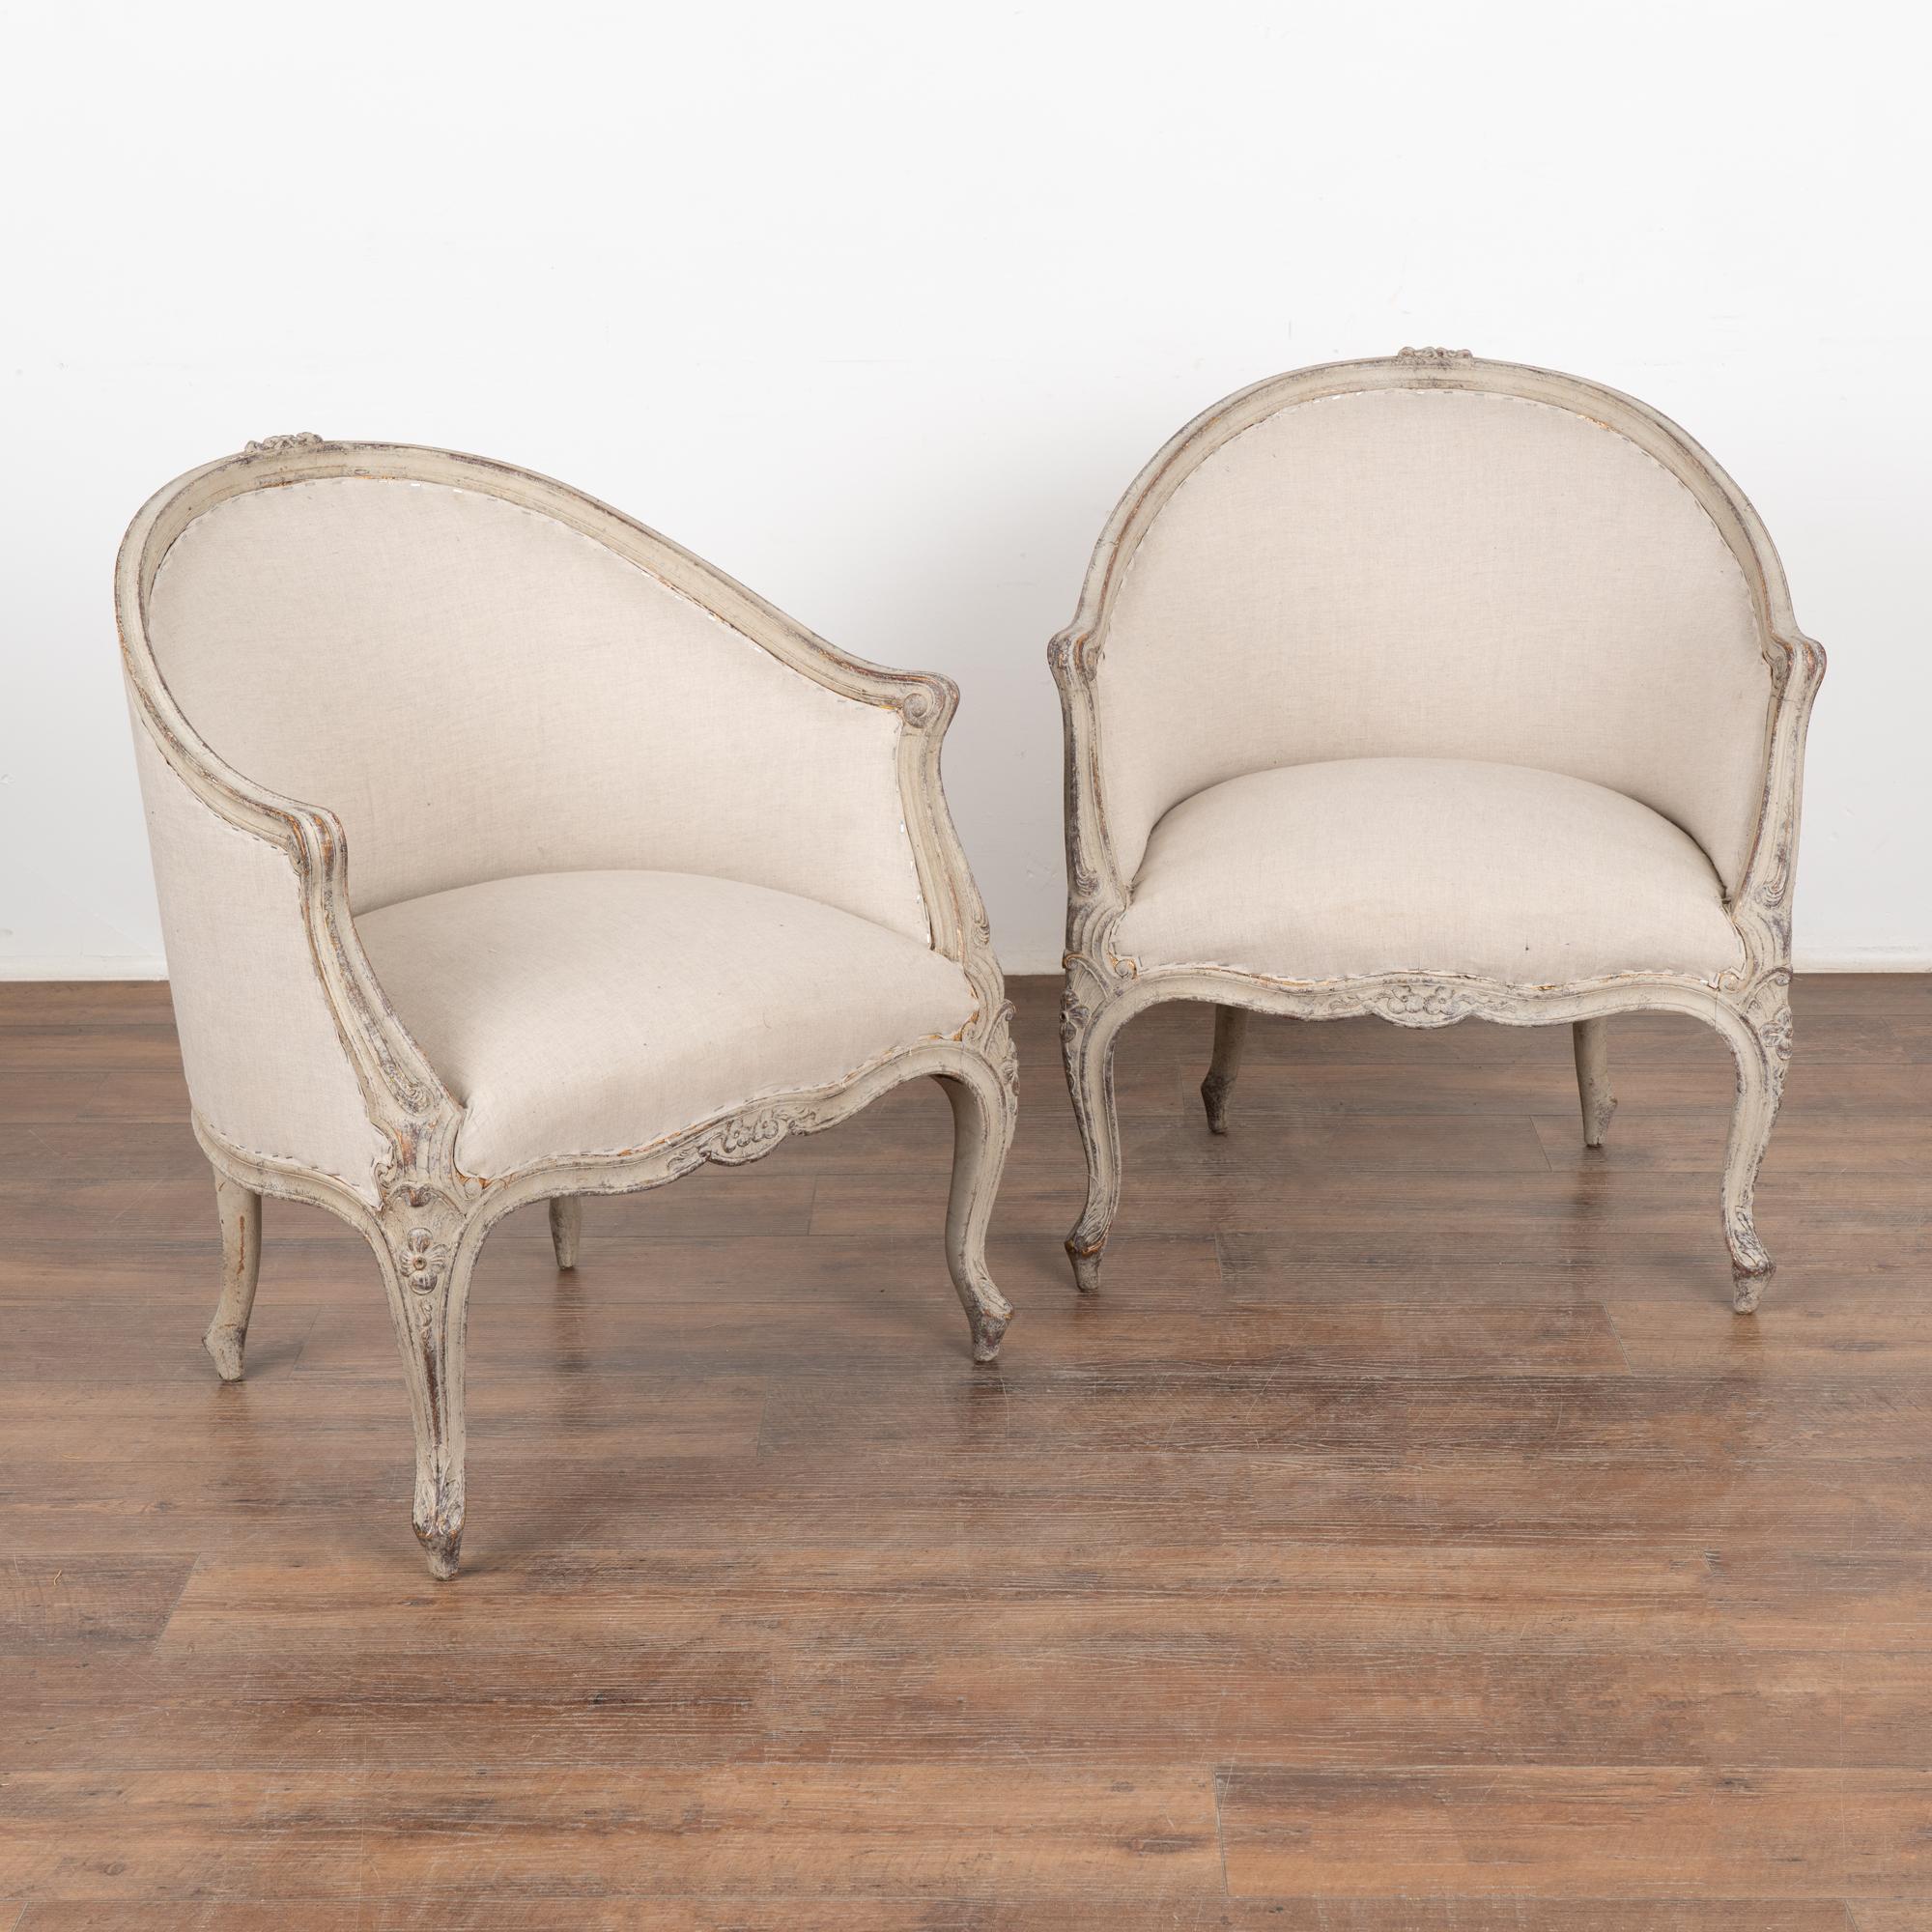 This pair of Swedish arm chairs have a gently curved barrel back and cabriolet legs adding to the graceful Gustavian appeal of each.
Delicate carving and curves are seen throughout the frame.
The newer professionally applied antique white/soft gray